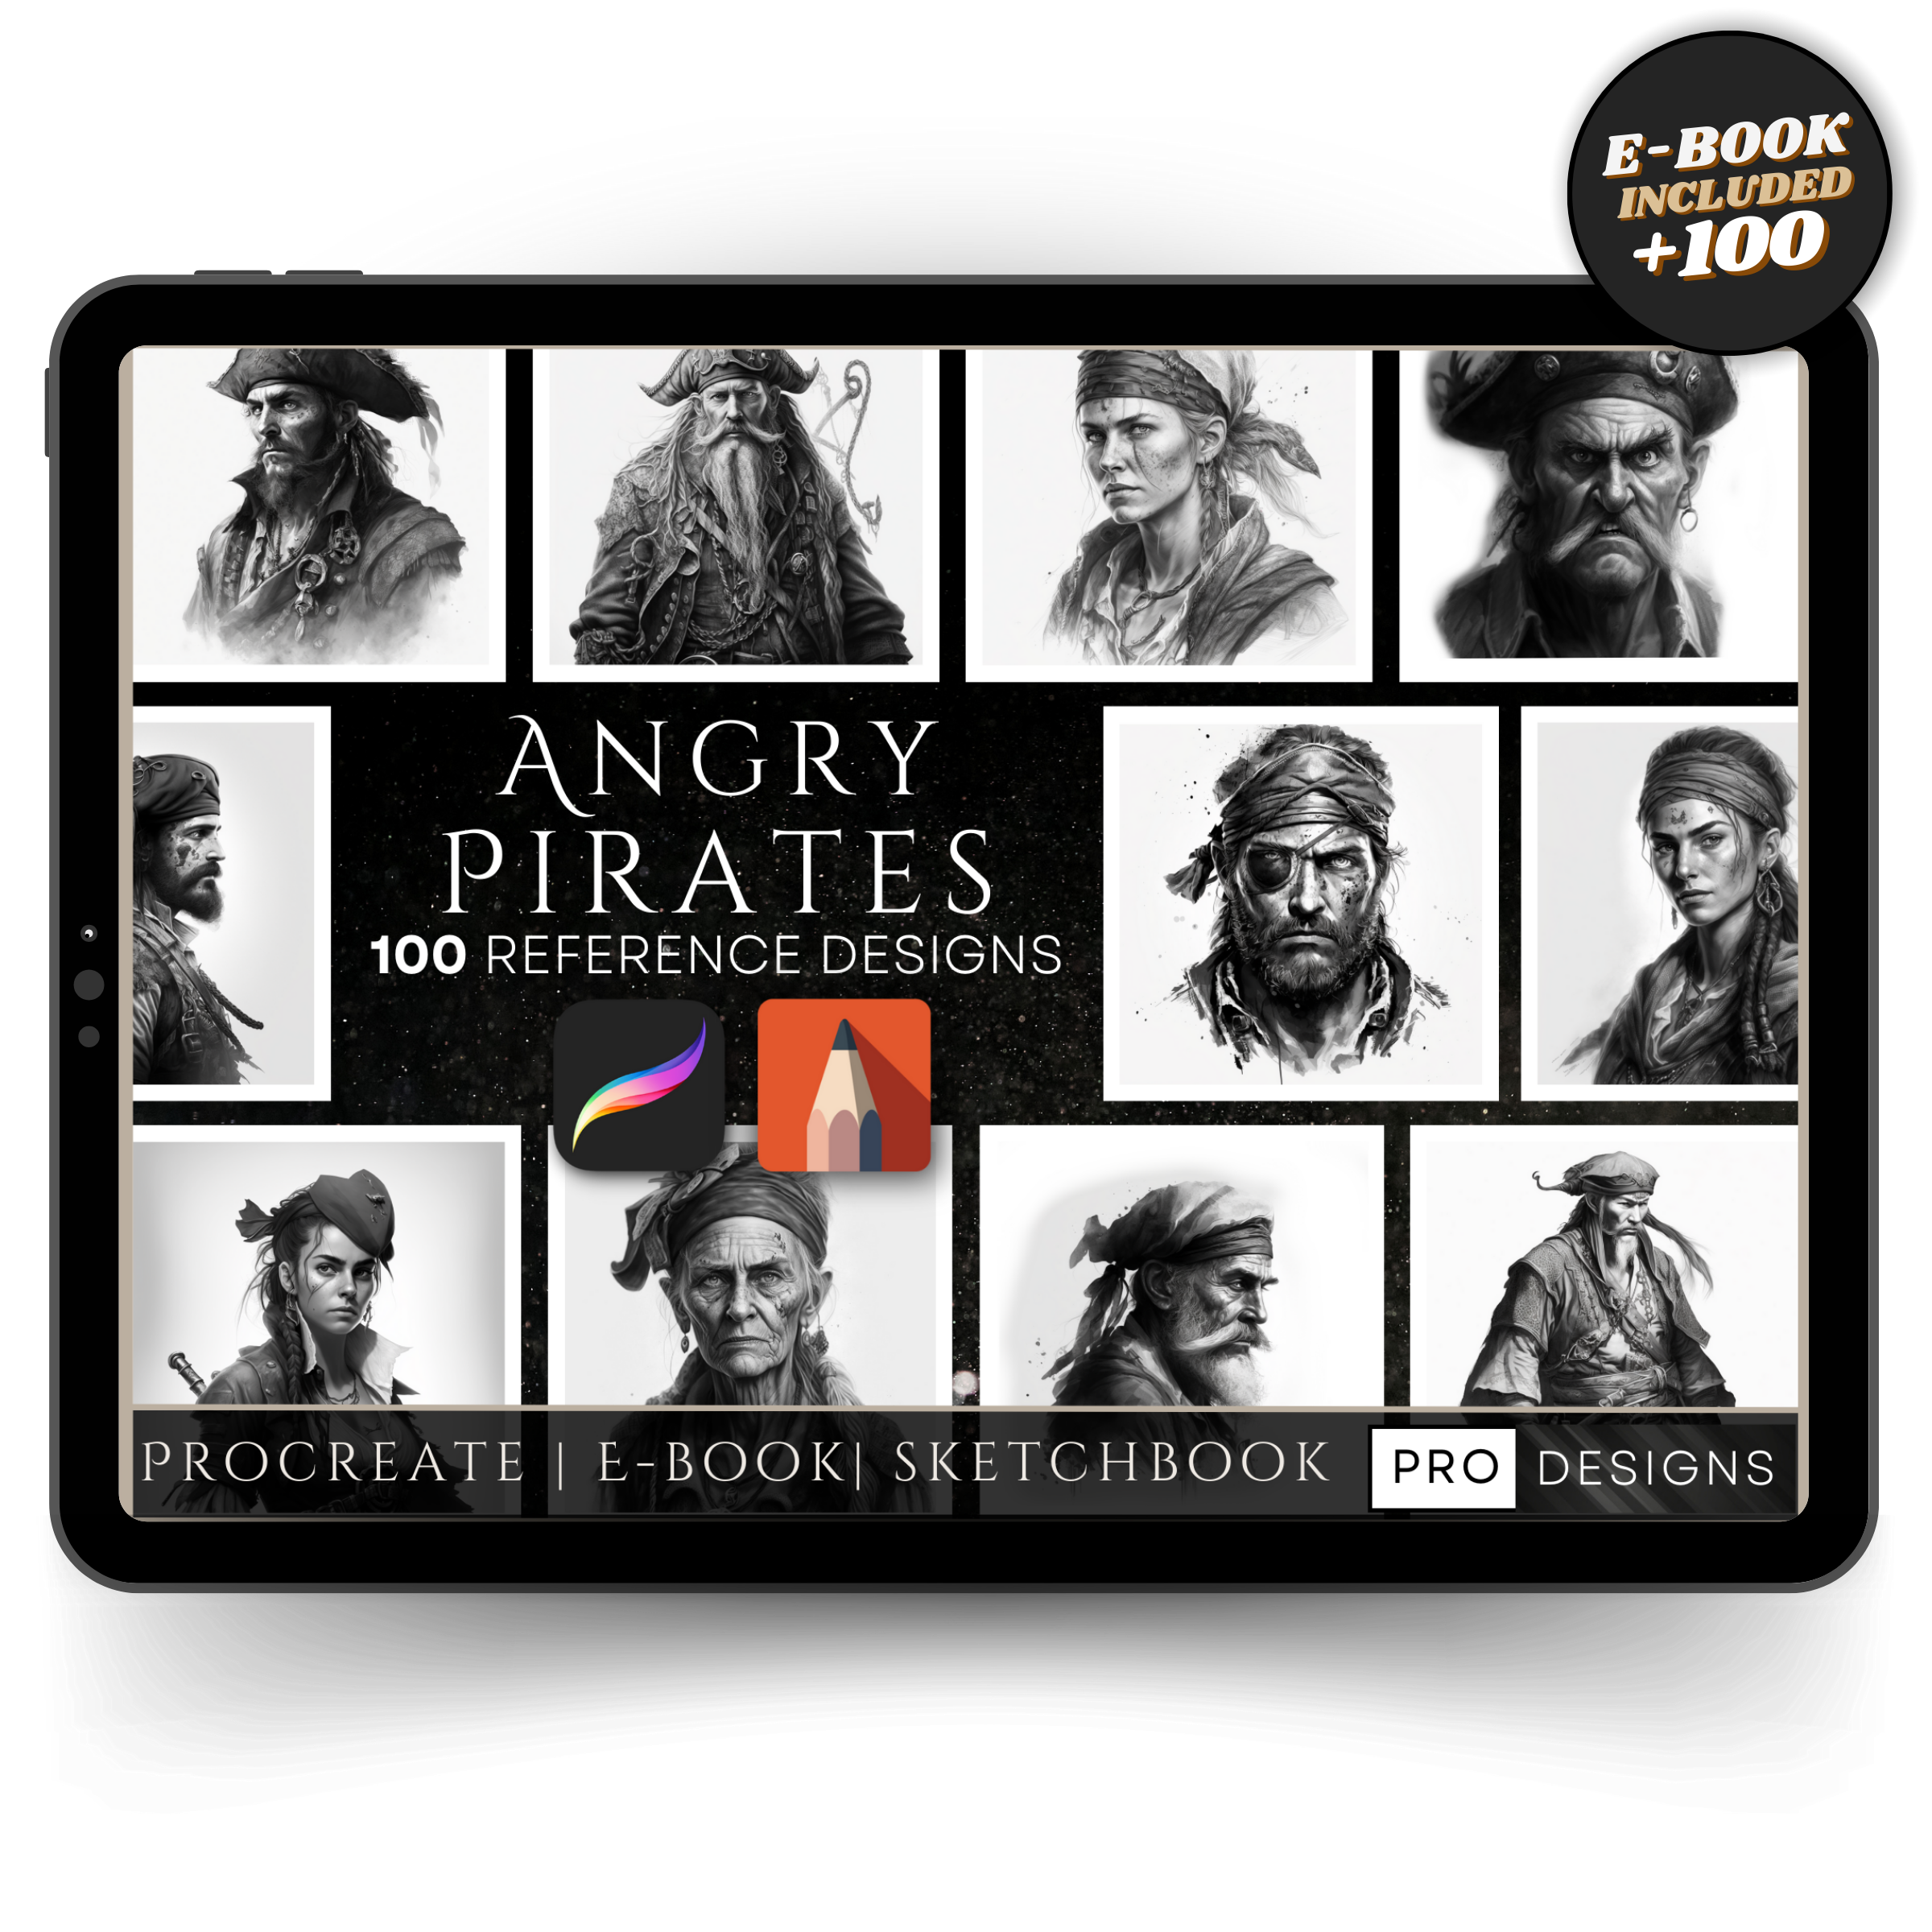 "Angry Pirates" - Sail into the Realm of Fearless Adventure